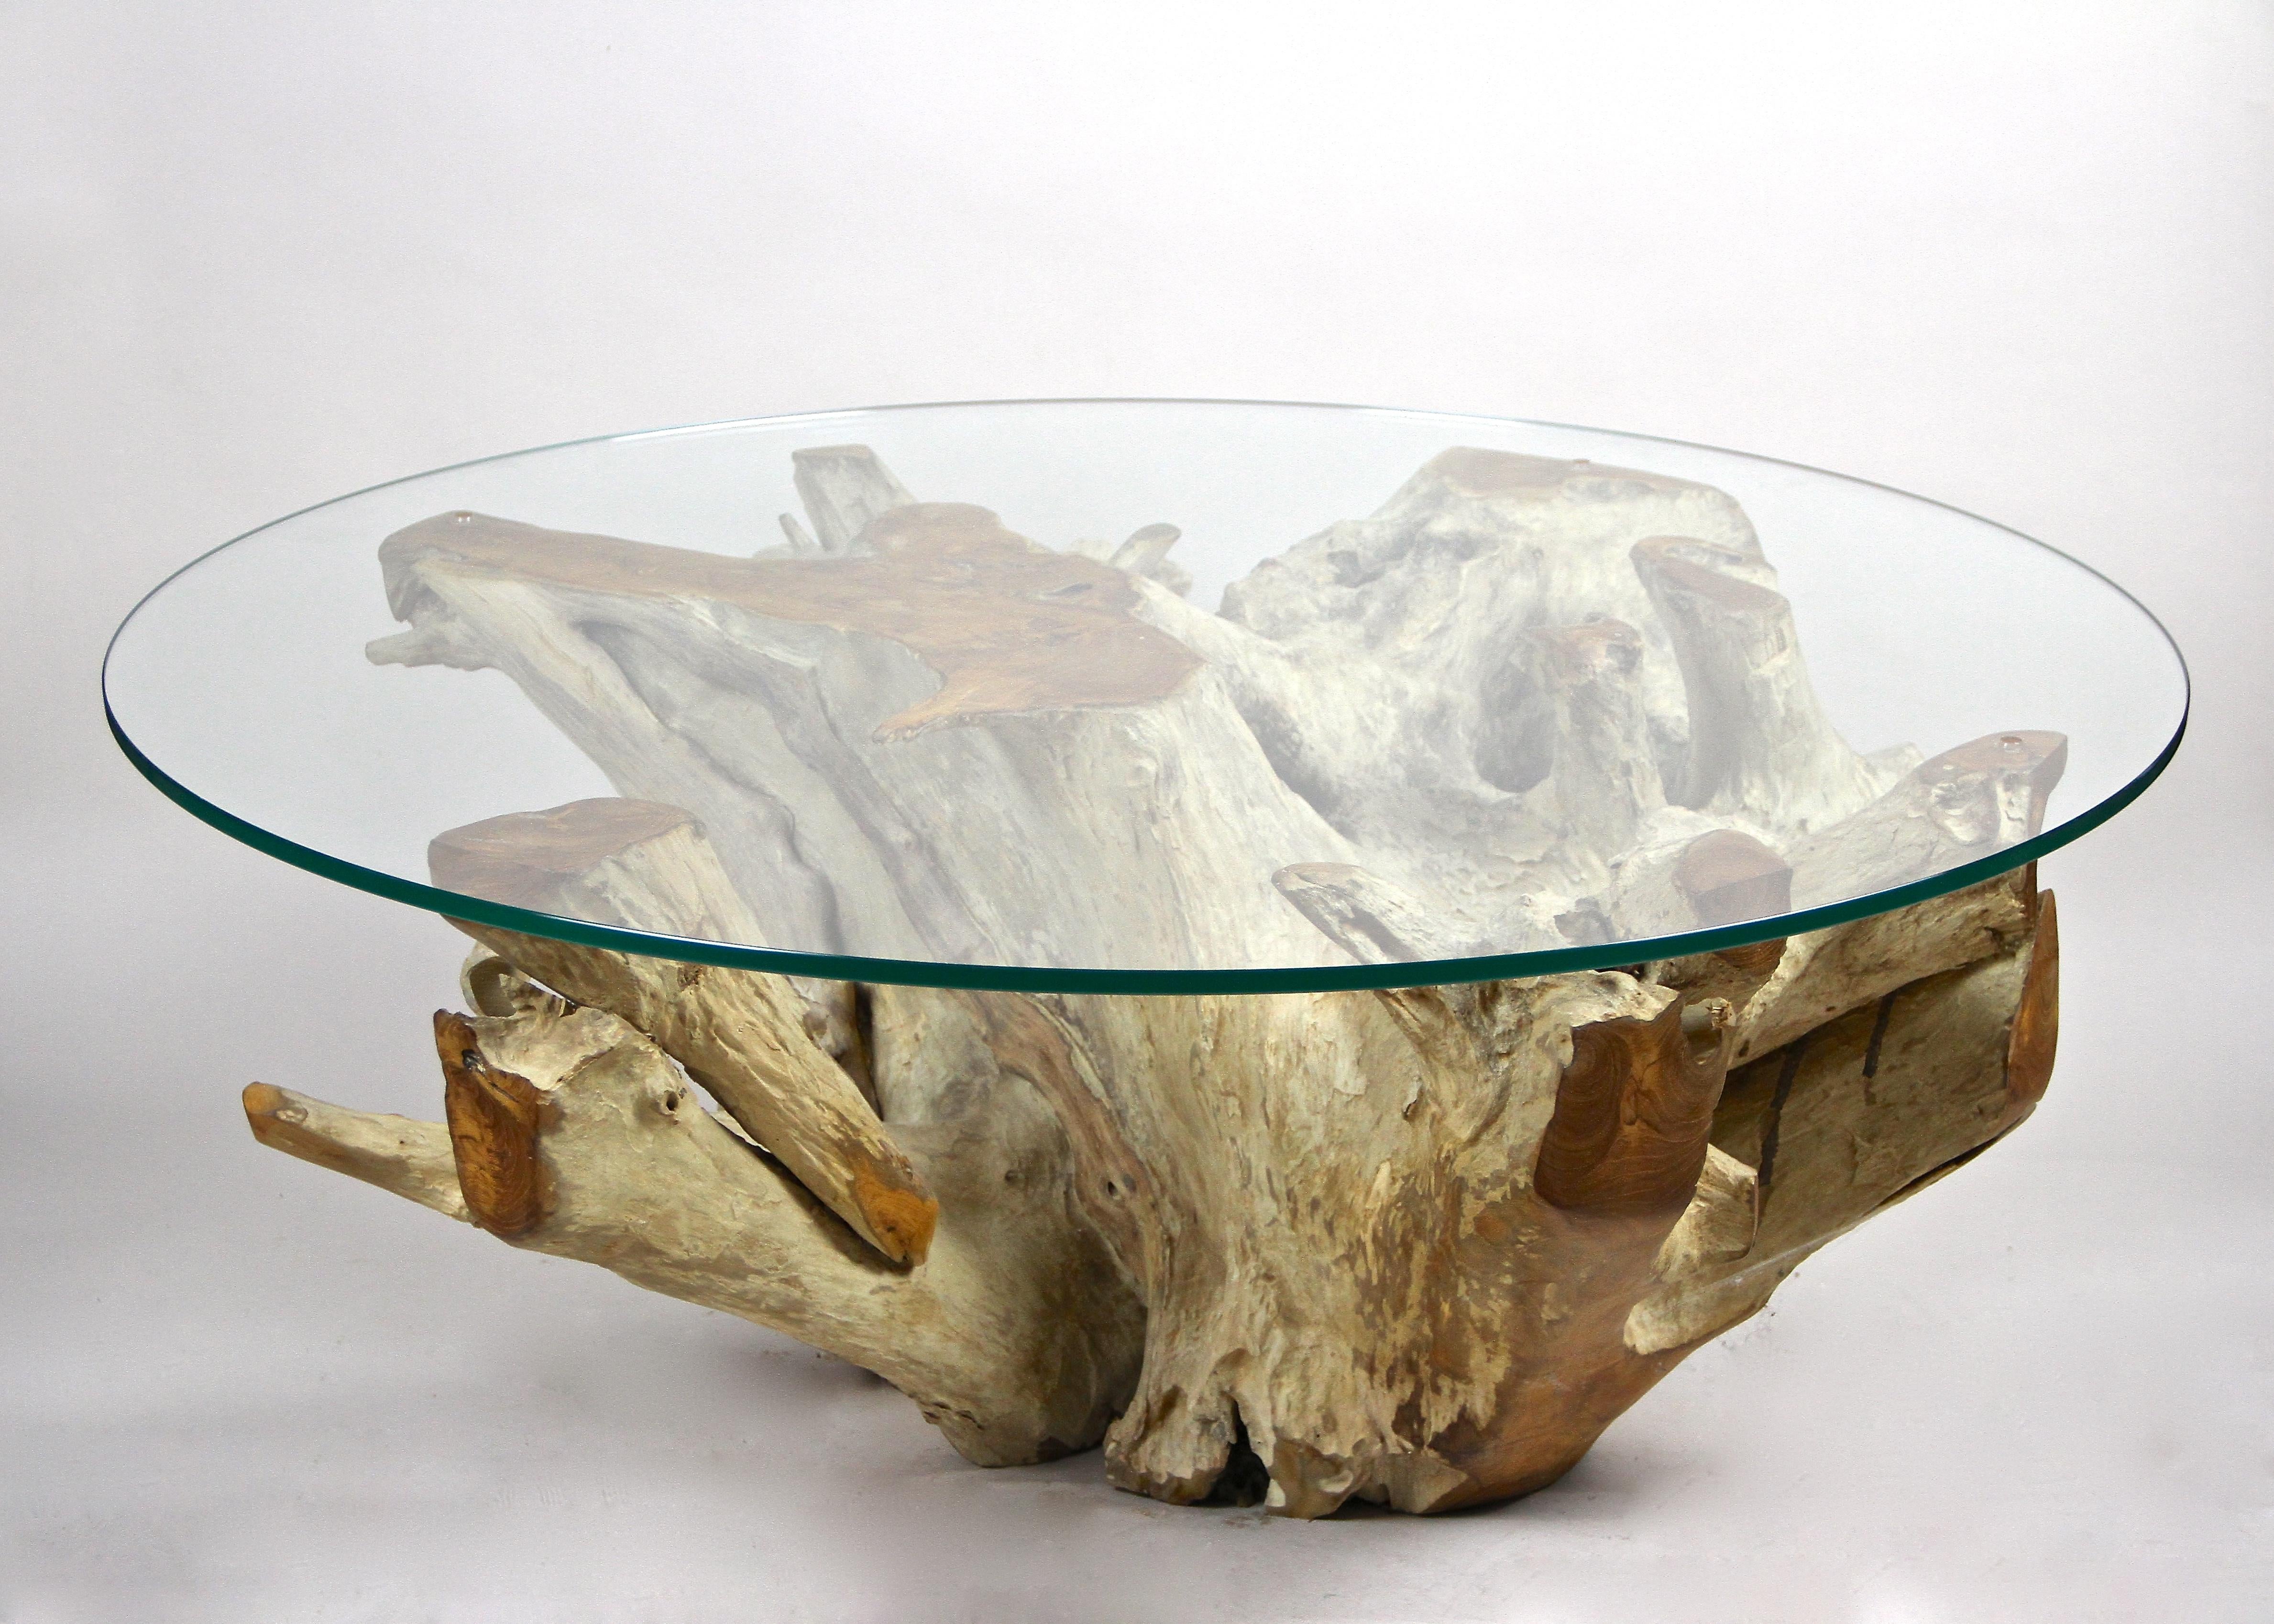 One of a kind round organic teak root coffee table with safety glass plate. This modern organic table was elaborately made out of one beautiful massive teak root which has been artfully cutted by the artist to get this unique shape. Then the root